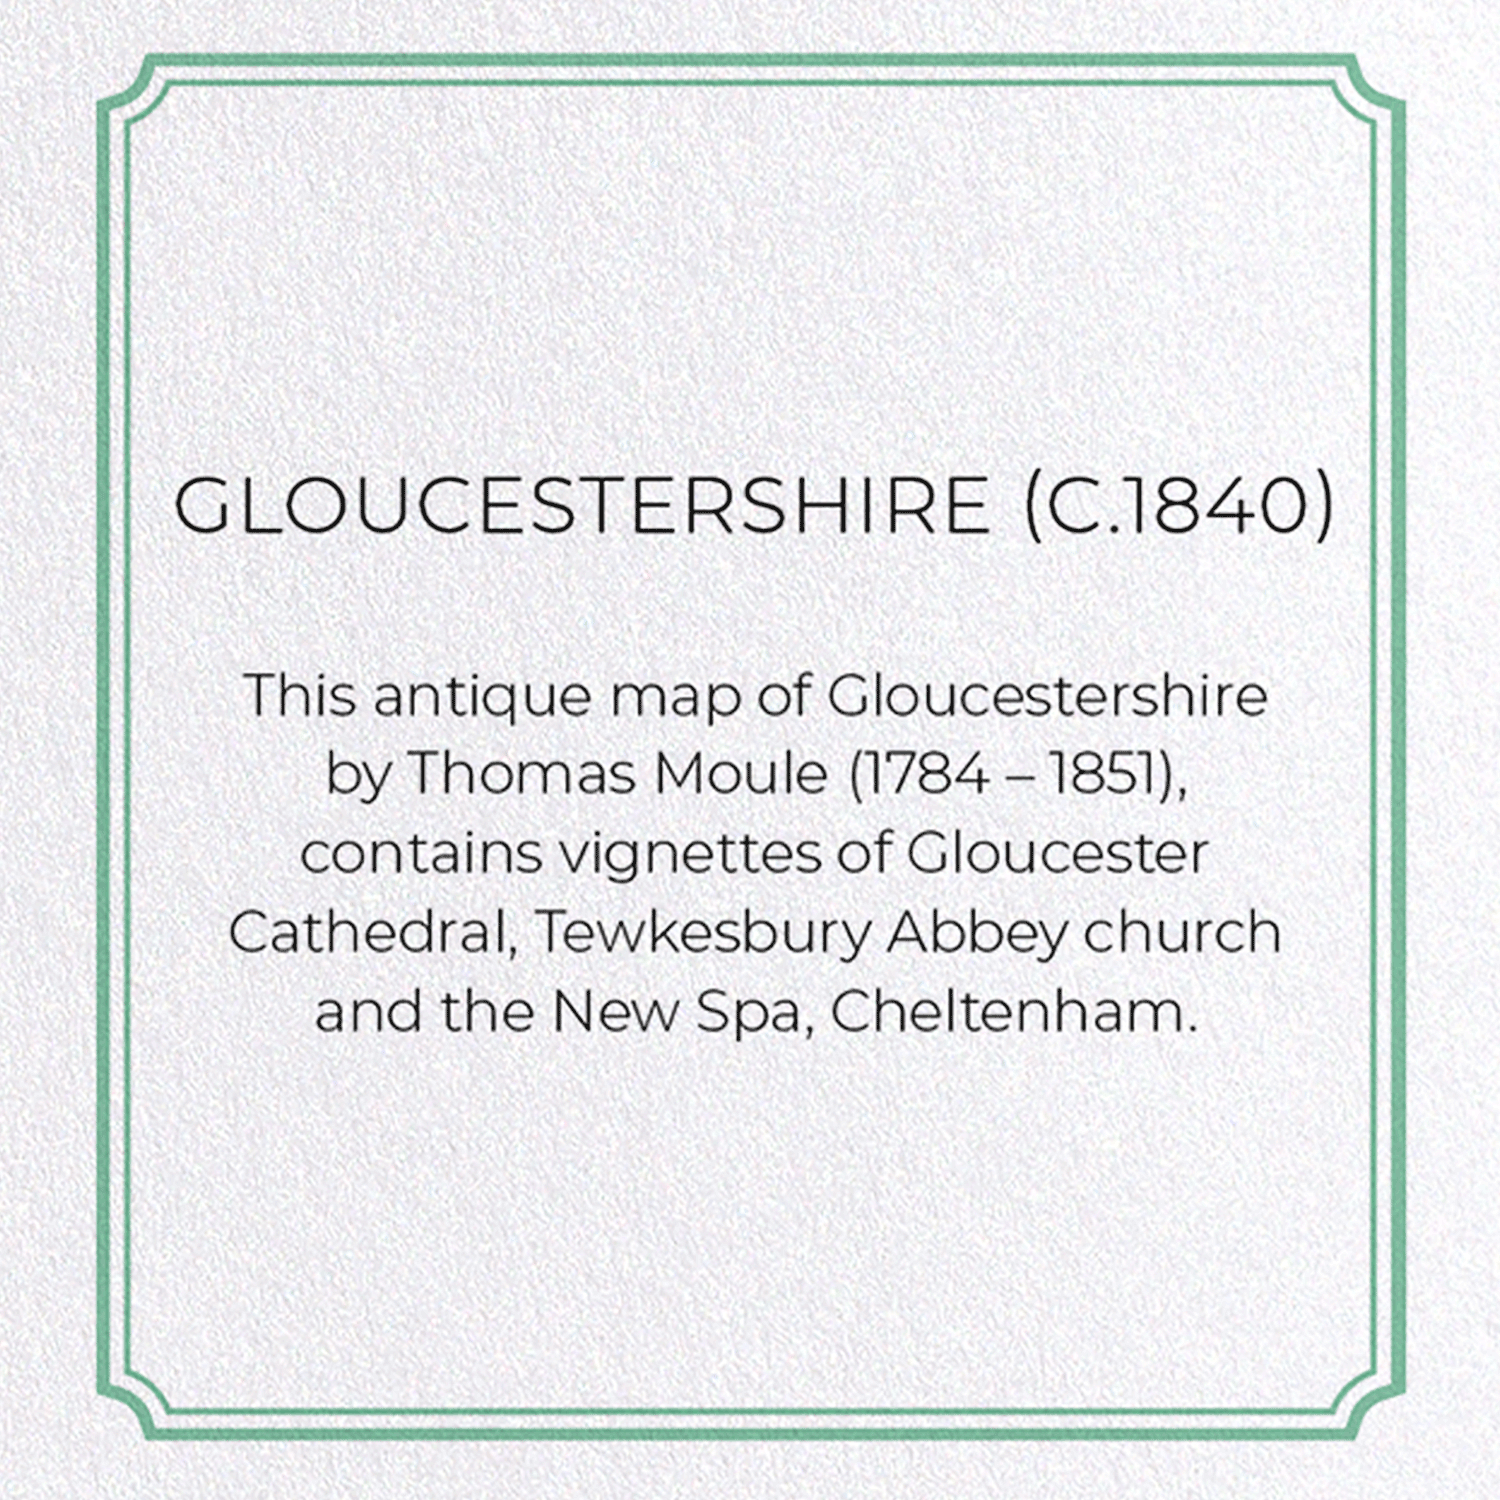 GLOUCESTERSHIRE (C.1840): Antique Map Greeting Card